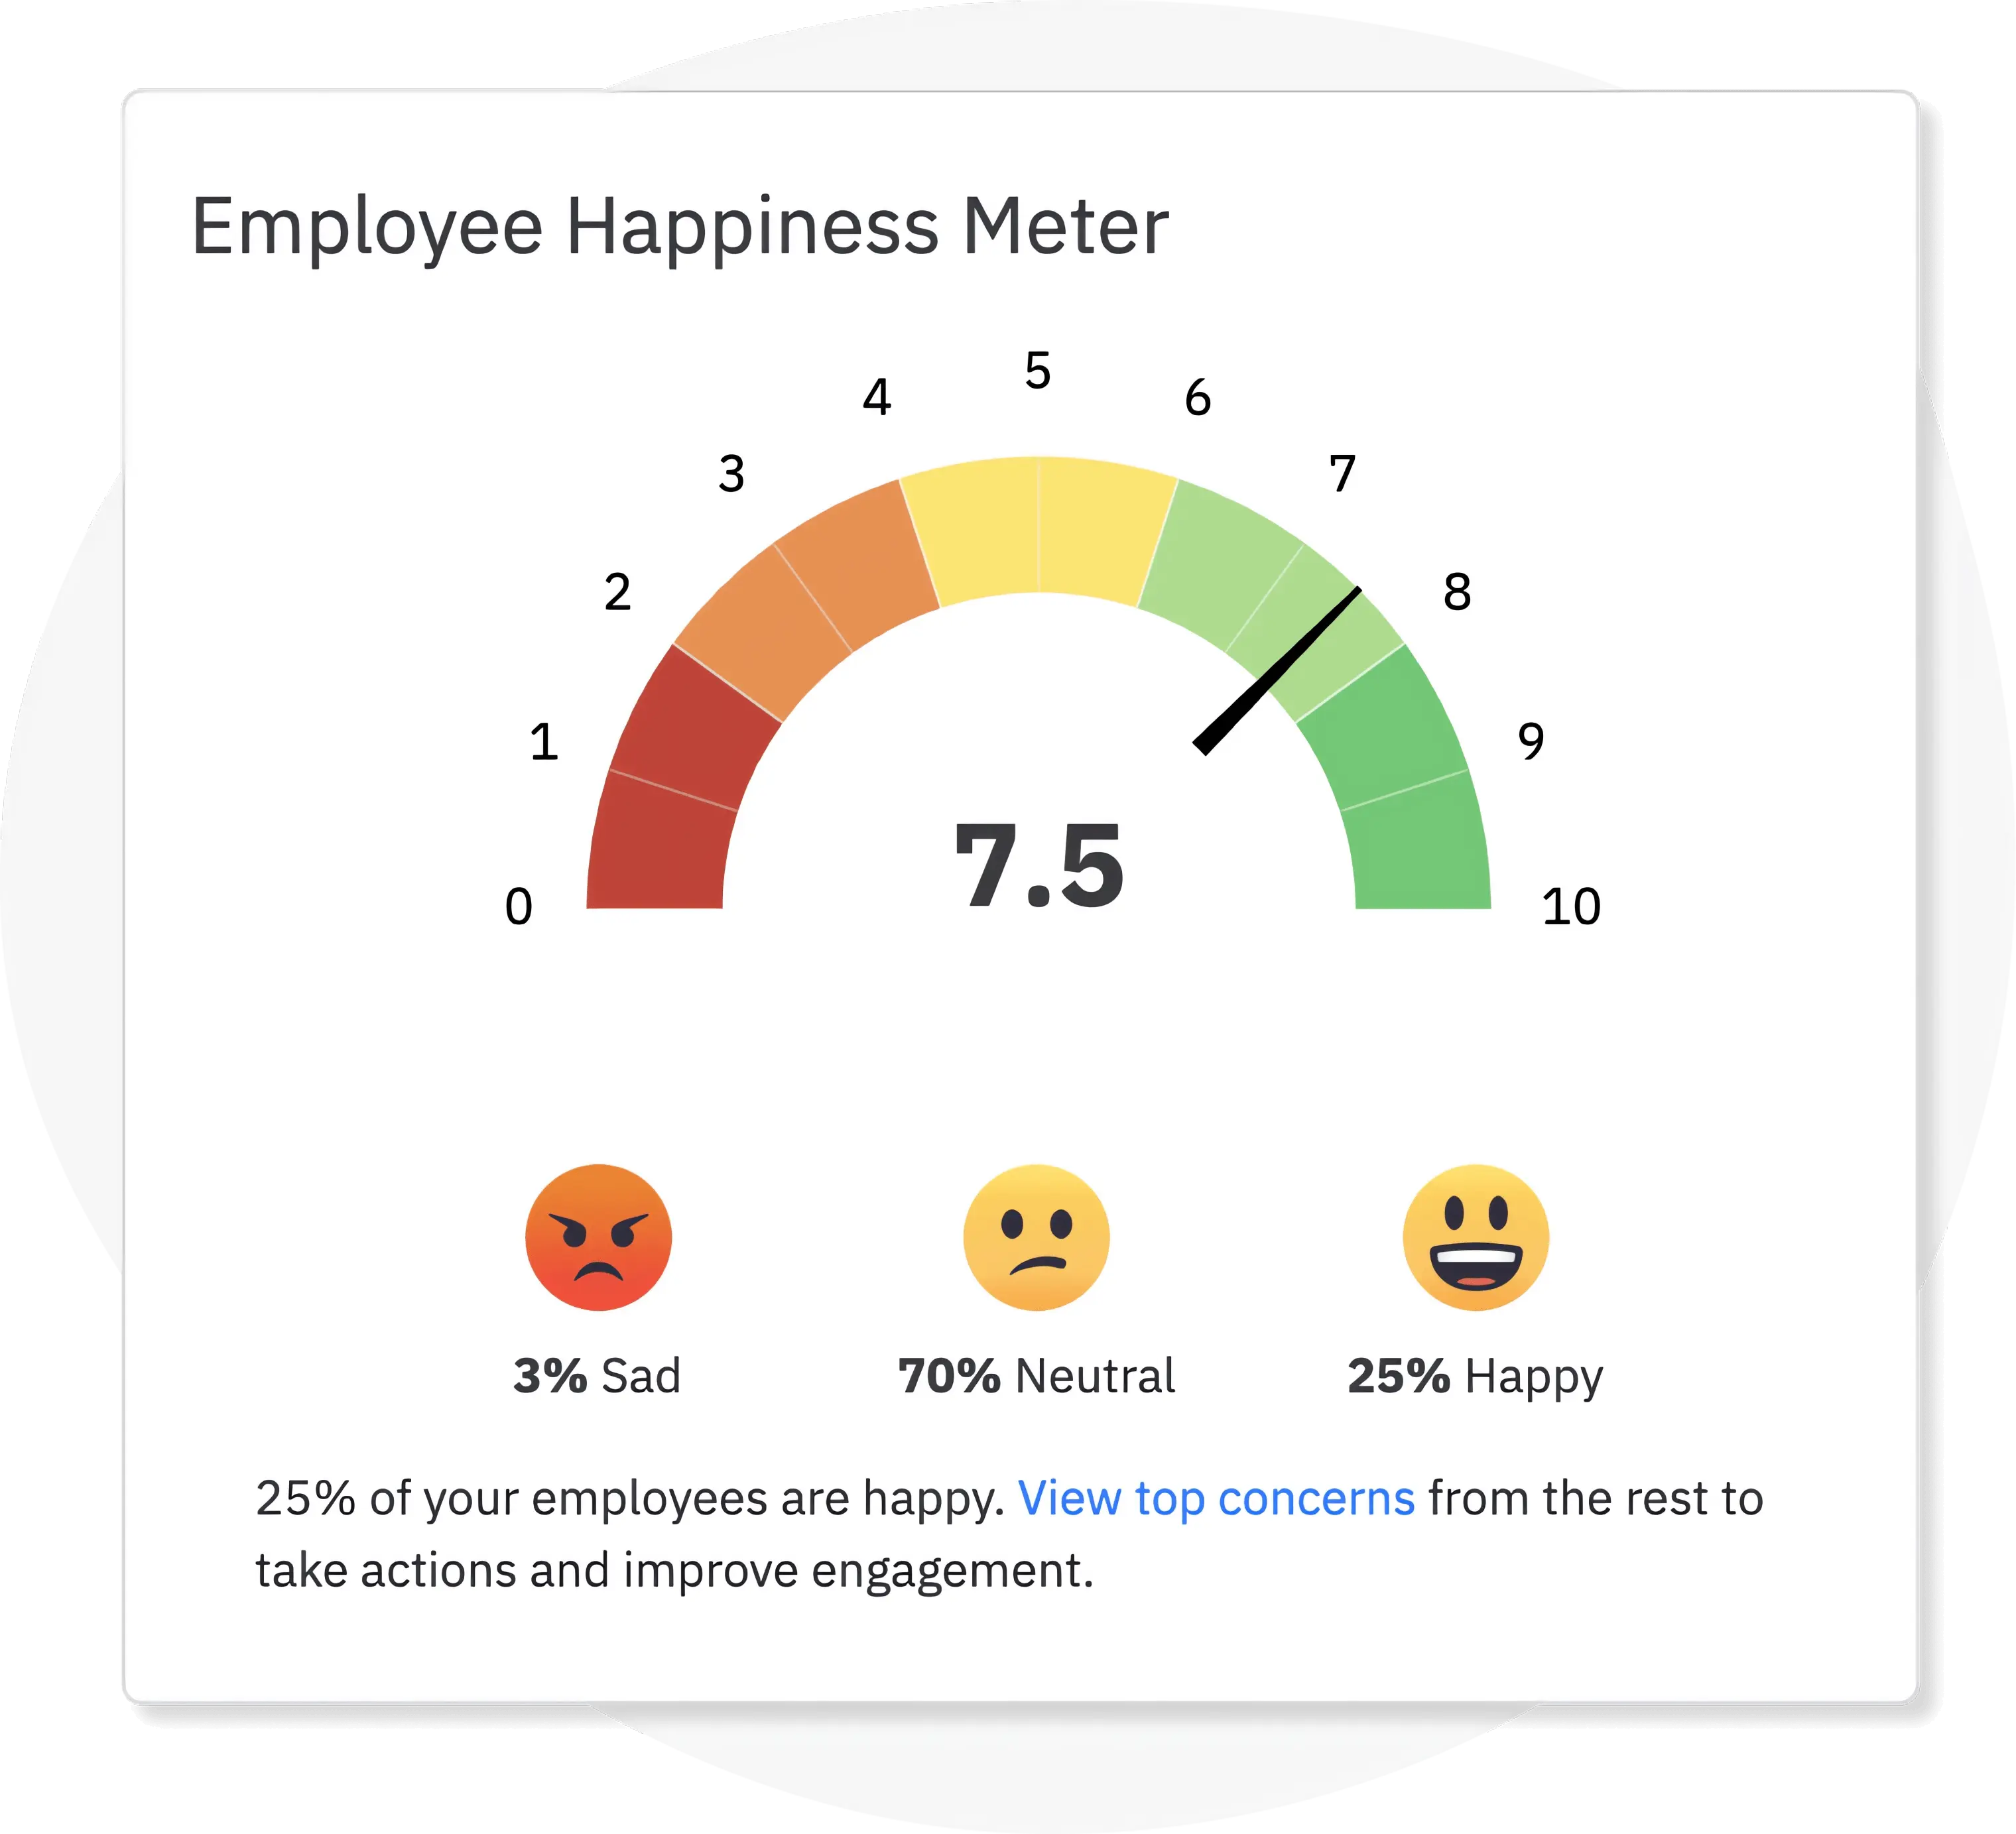 A clearer view of overall employee sentiment divided into happy, sad, and neutral through employee feedback surveys.